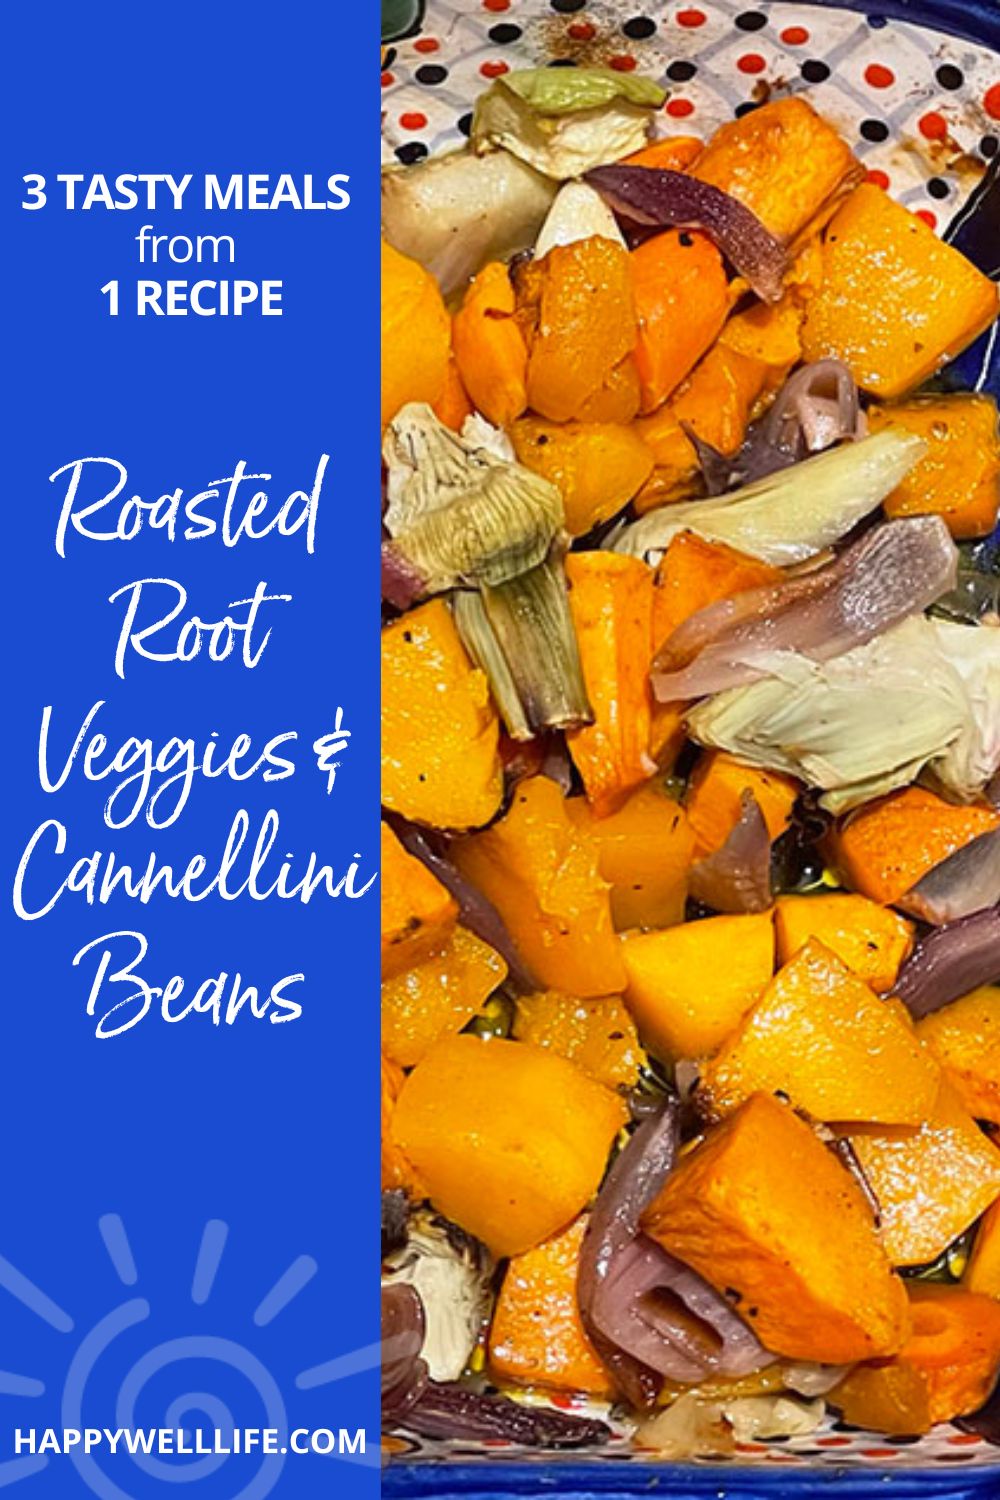 Roasted Root Veggies & Cannellini Beans 3 meals out of 1 recipe